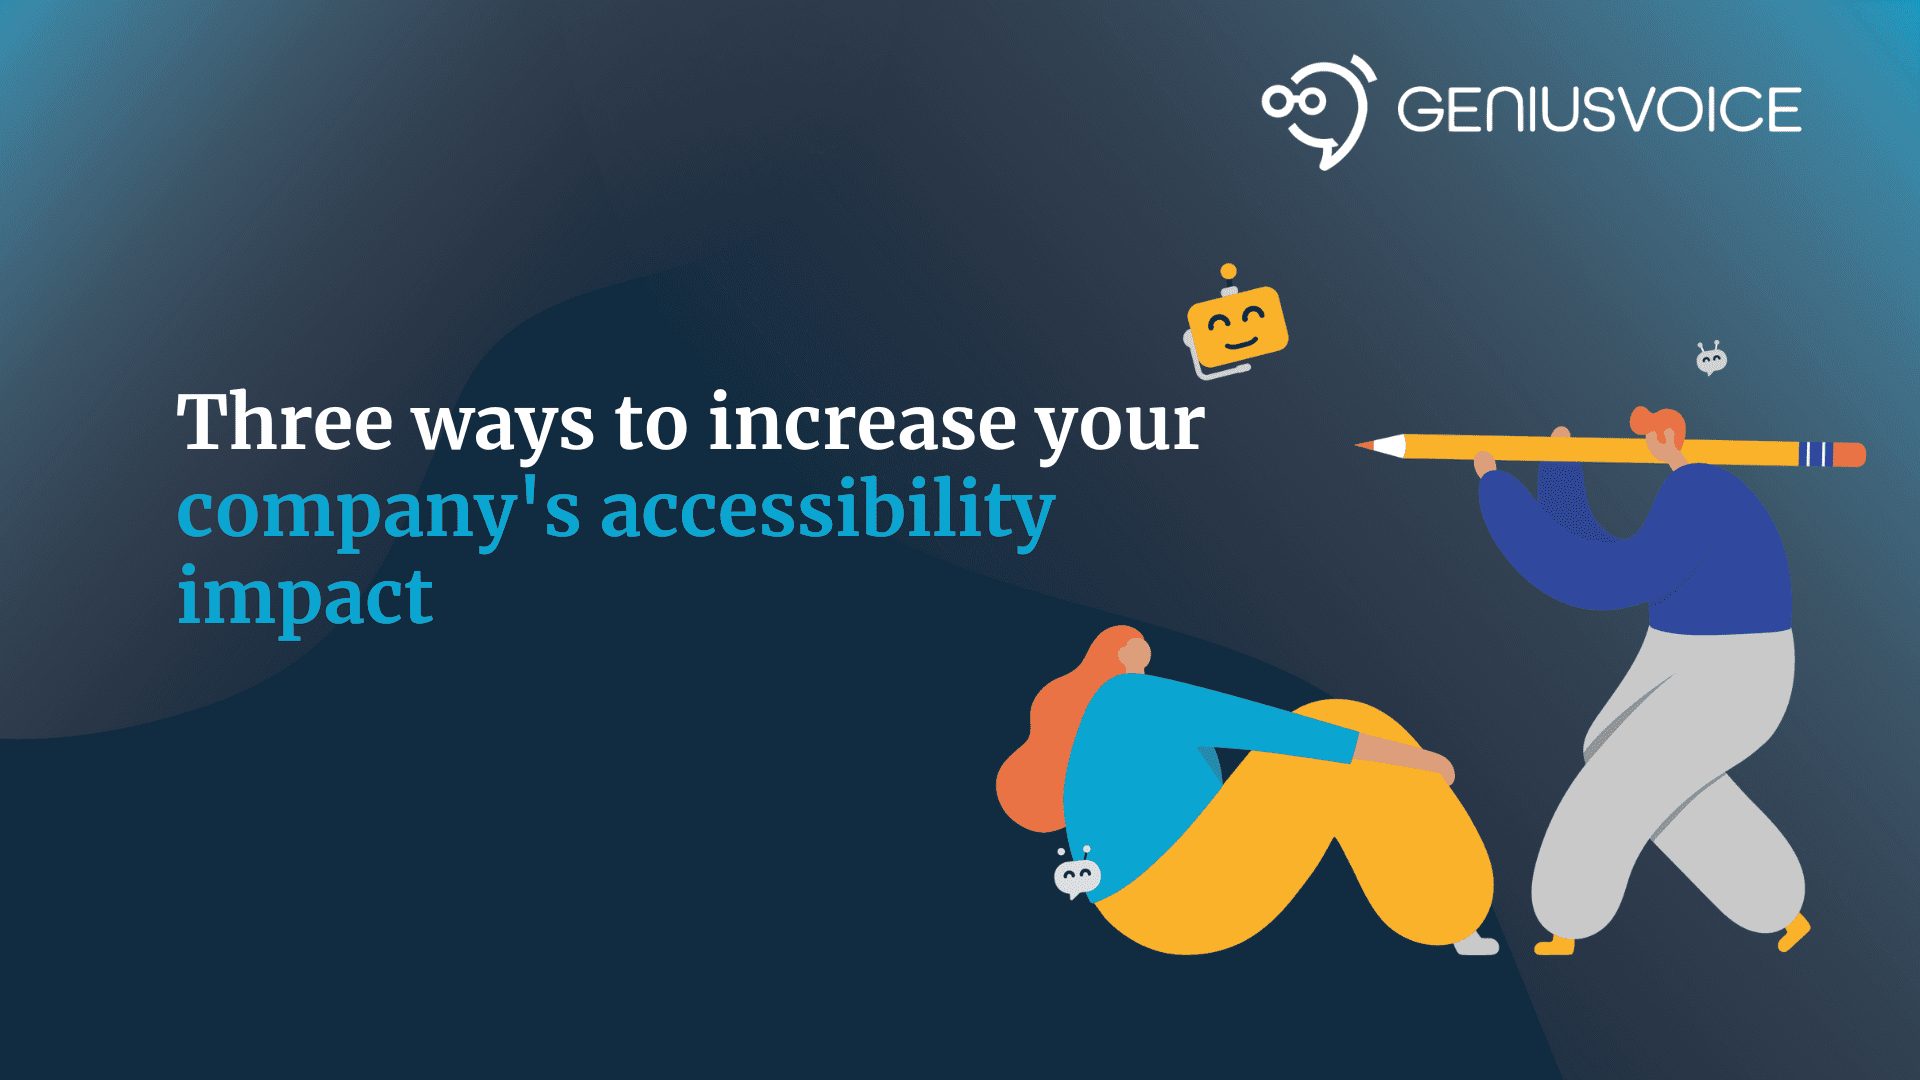 Three ways to increase your company’s accessibility impact!